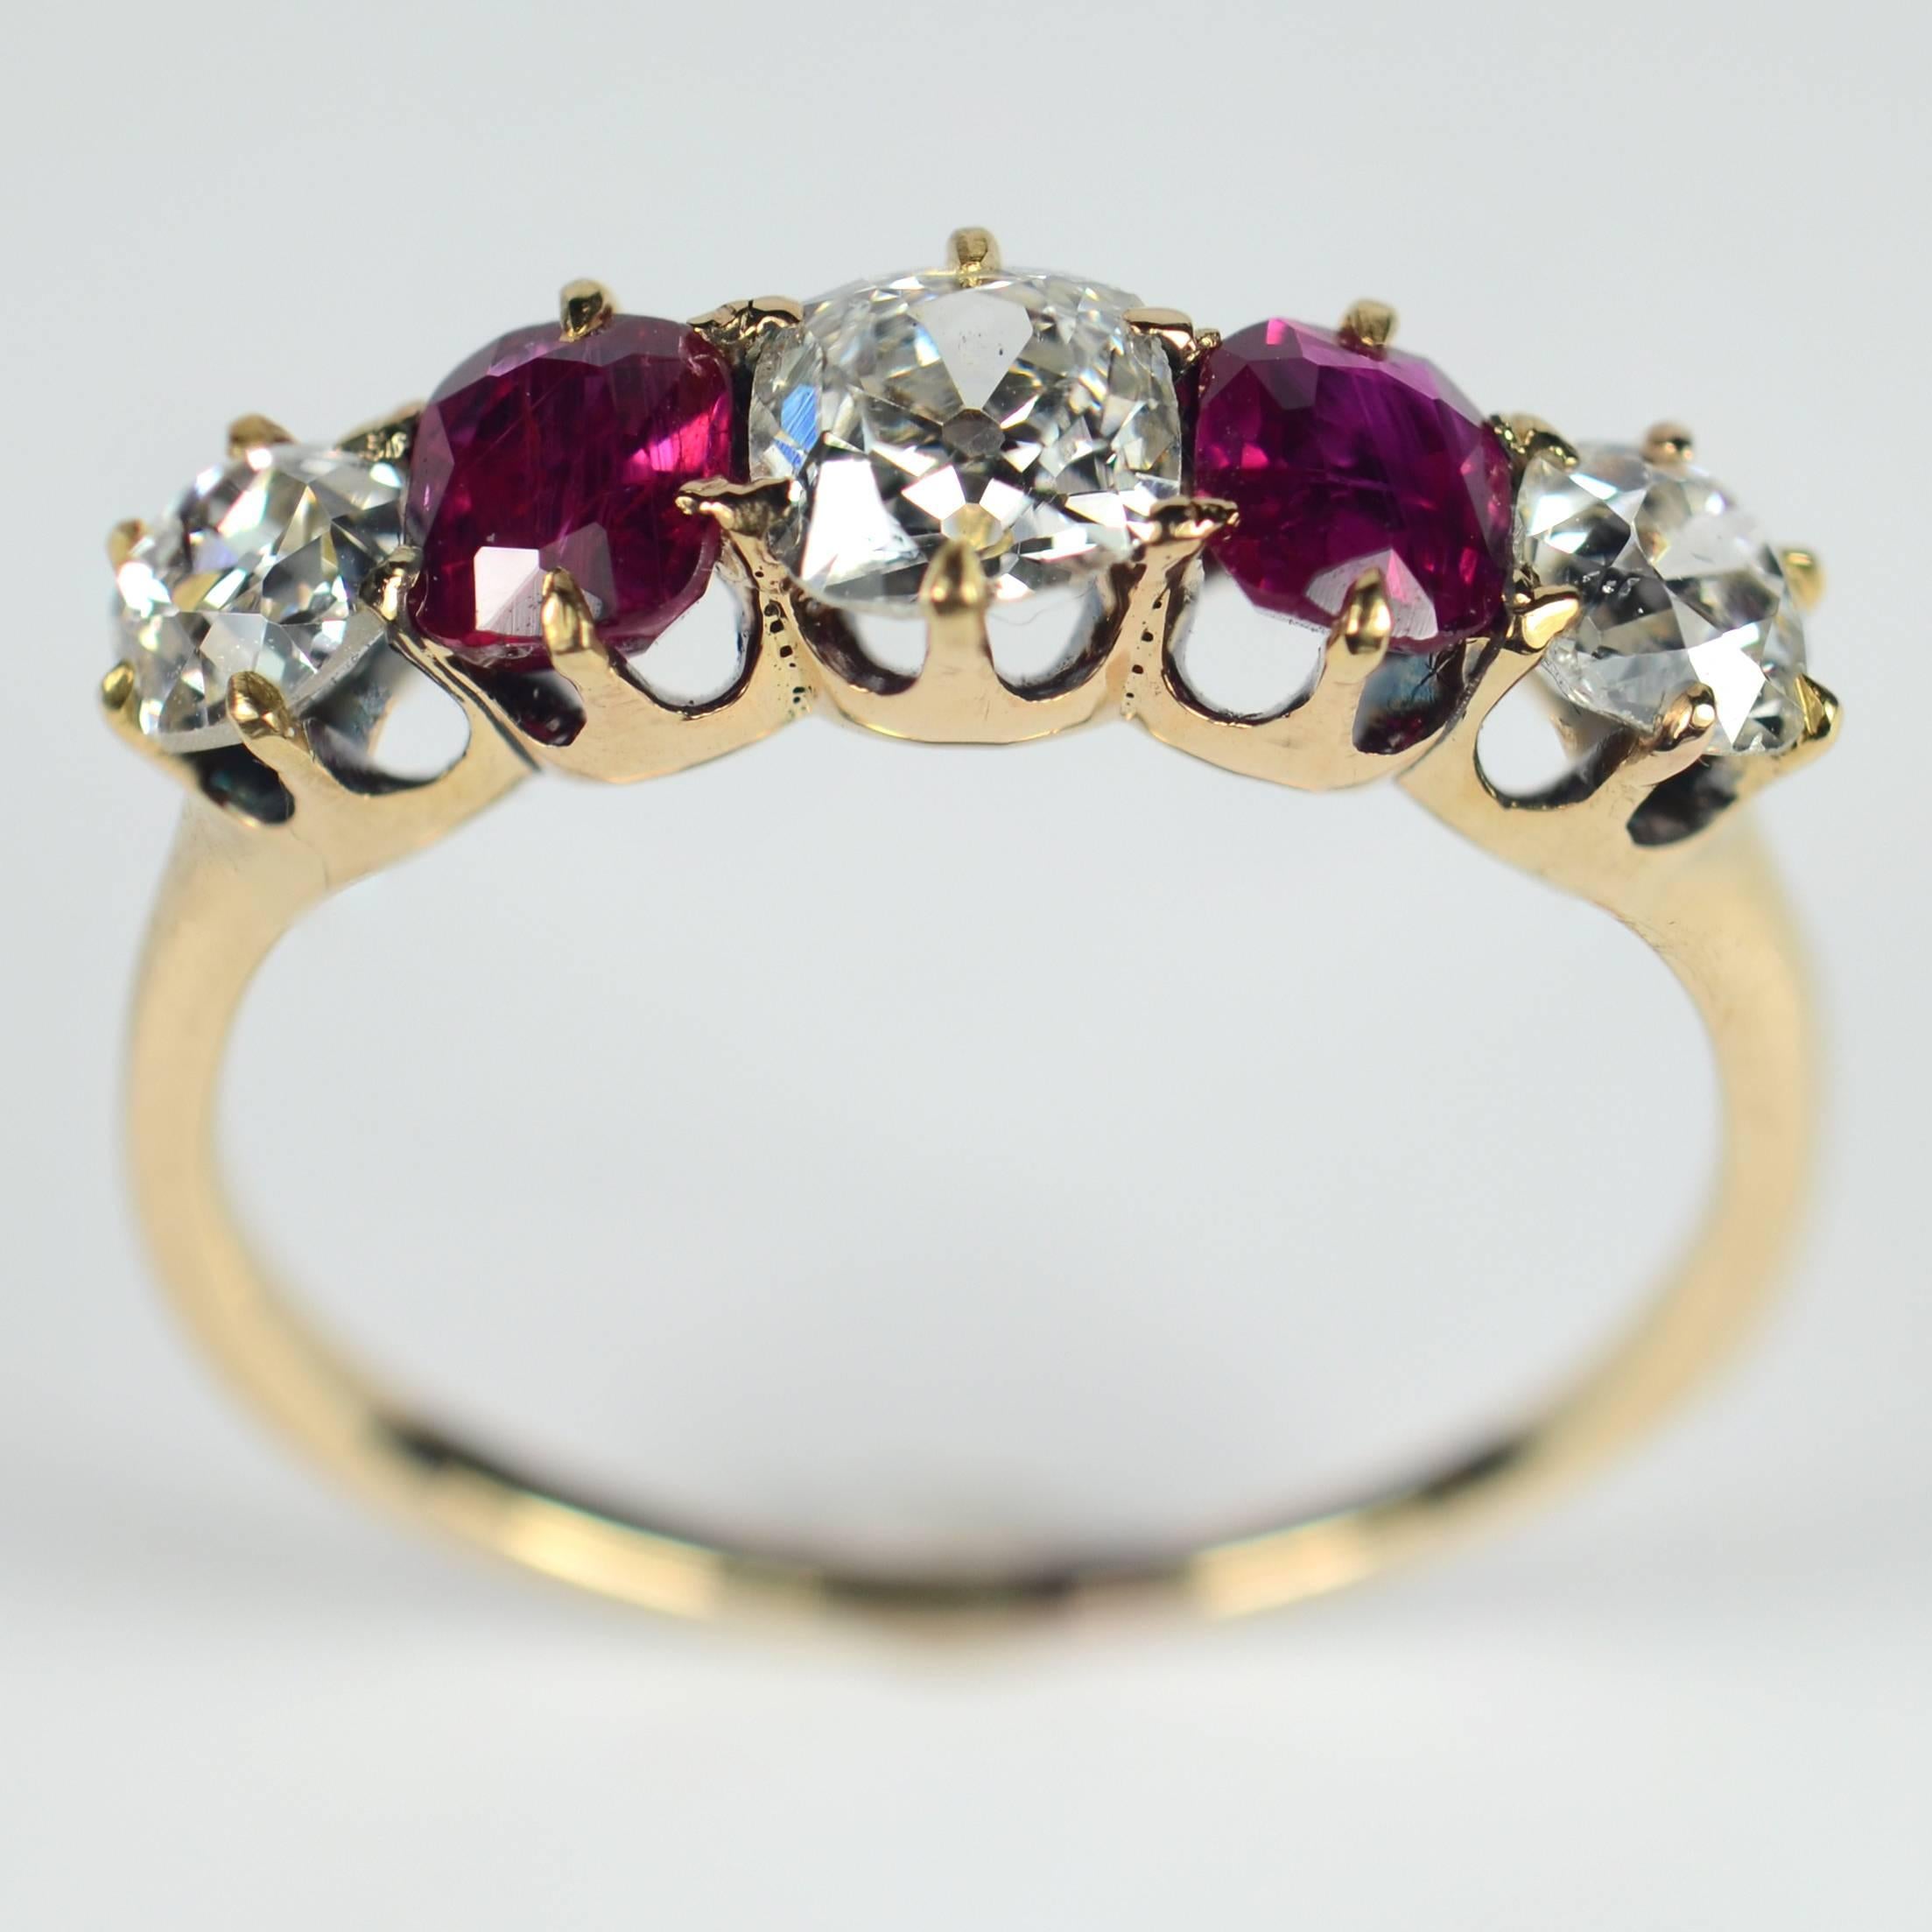 A classic Edwardian five stone ring set with three bright and lively old-cut diamonds and two cushion cut rubies of Thai and Burmese origin.

The diamonds weigh a total of approximately 1.23 carats and are G-H colour and VS-SI clarity (very slightly